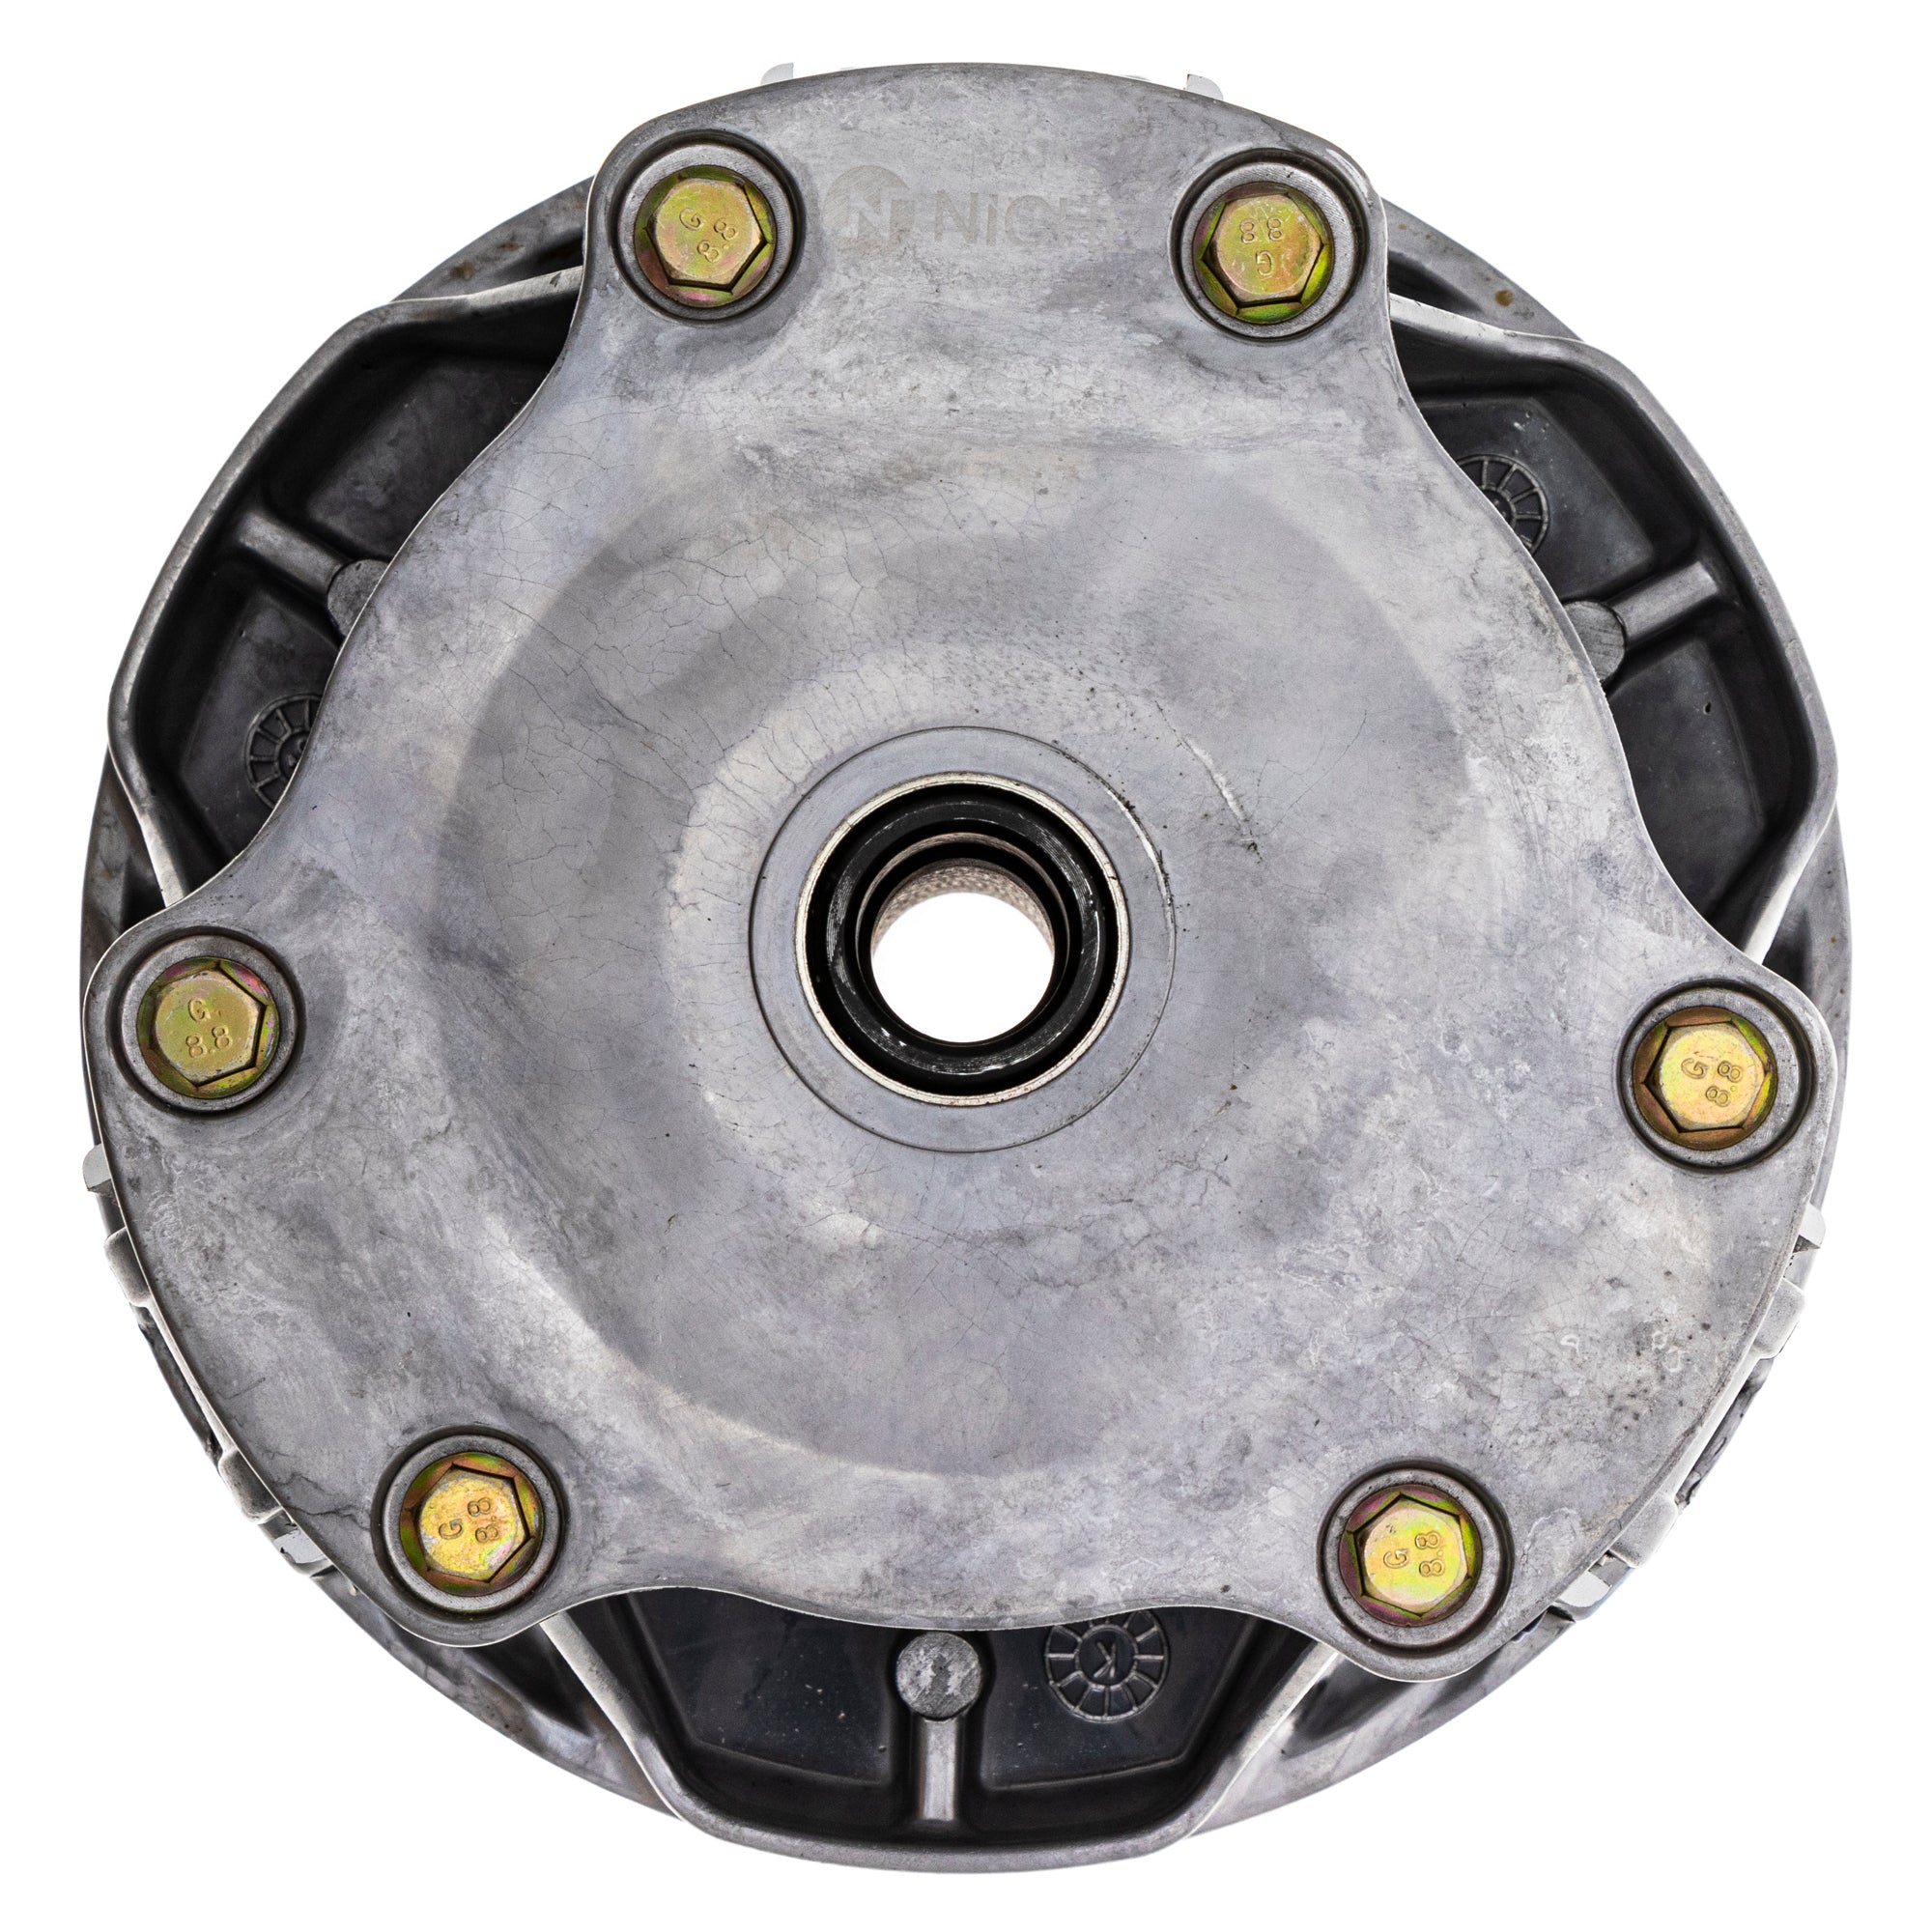 Primary Drive Clutch For Polaris 1322965